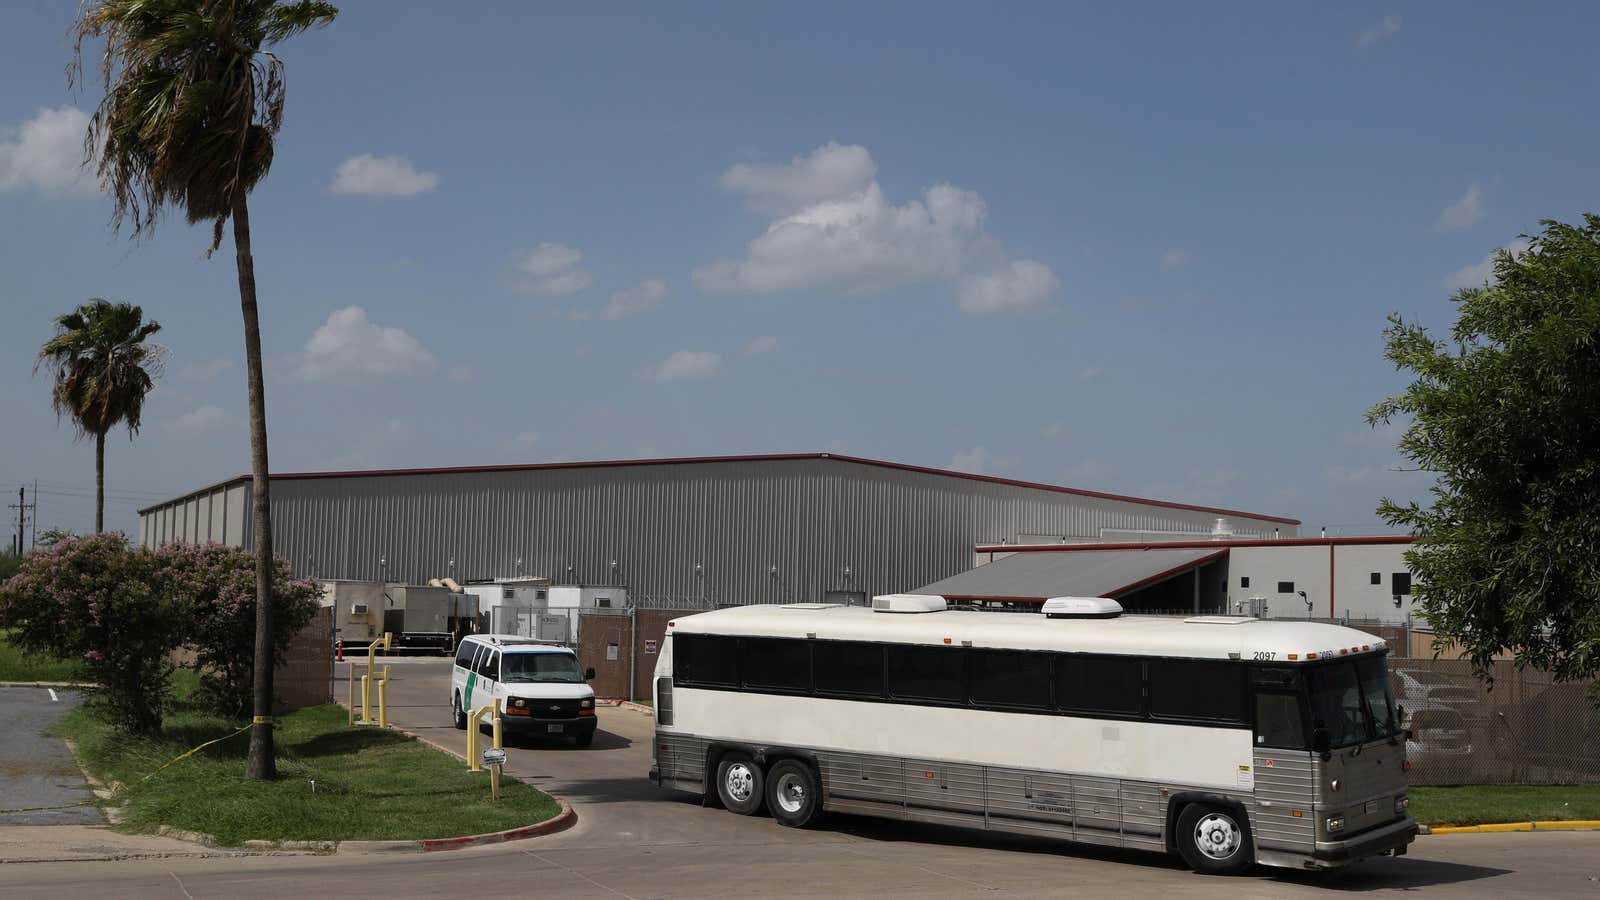 The US Border Patrols warehouse-turned-migrant-processing-center in McAllen, Texas